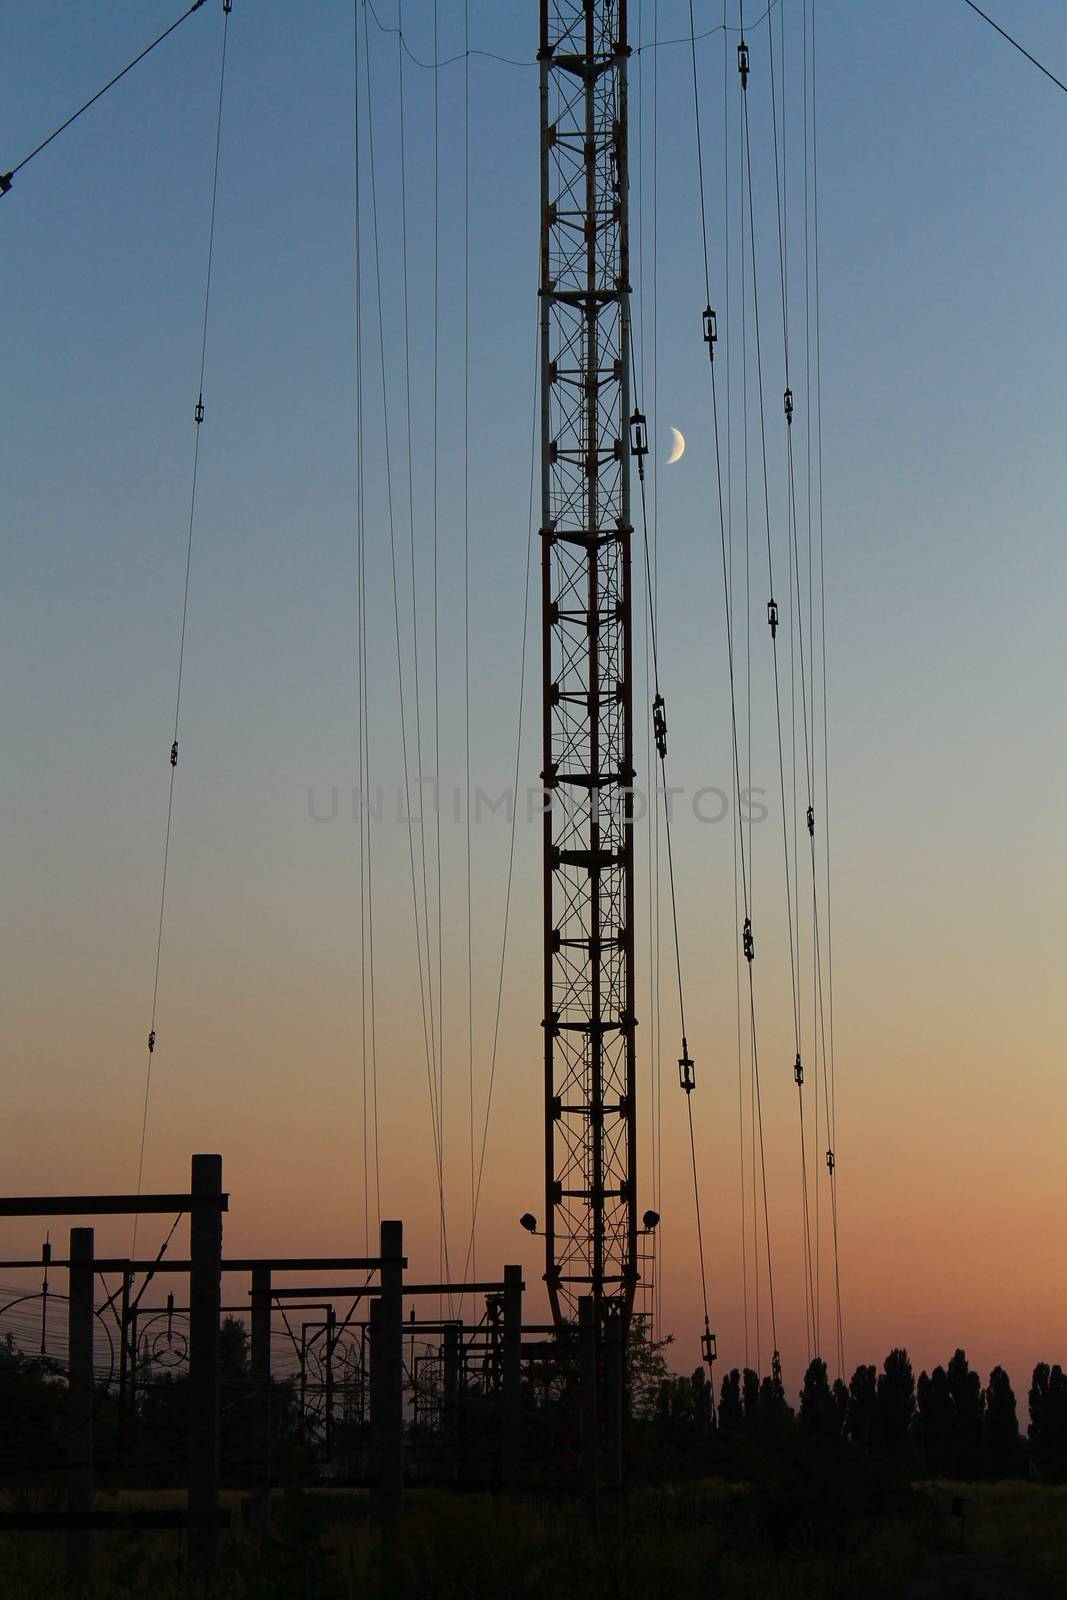 Radio and television tower on the background of the sunset and the moon.